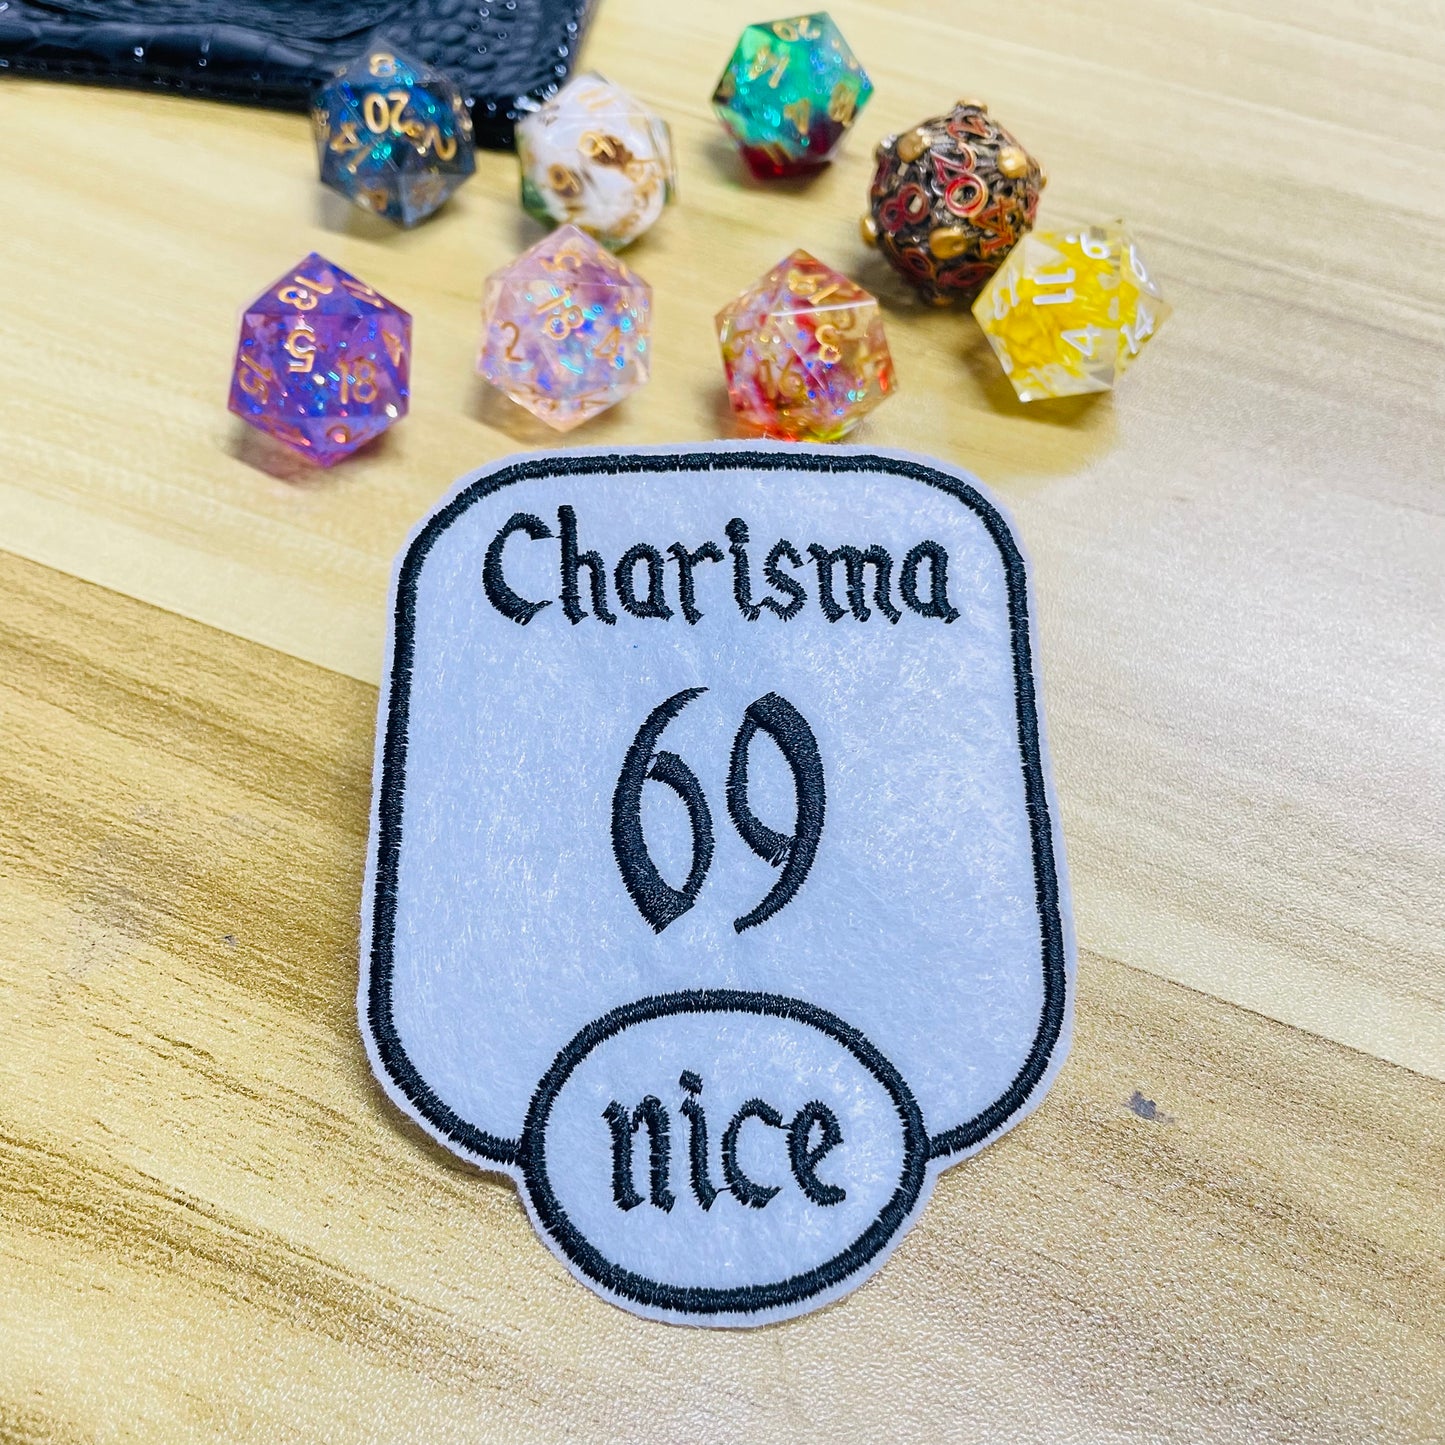 FREE Today: 69 Charisma TTRPG Stat Patch